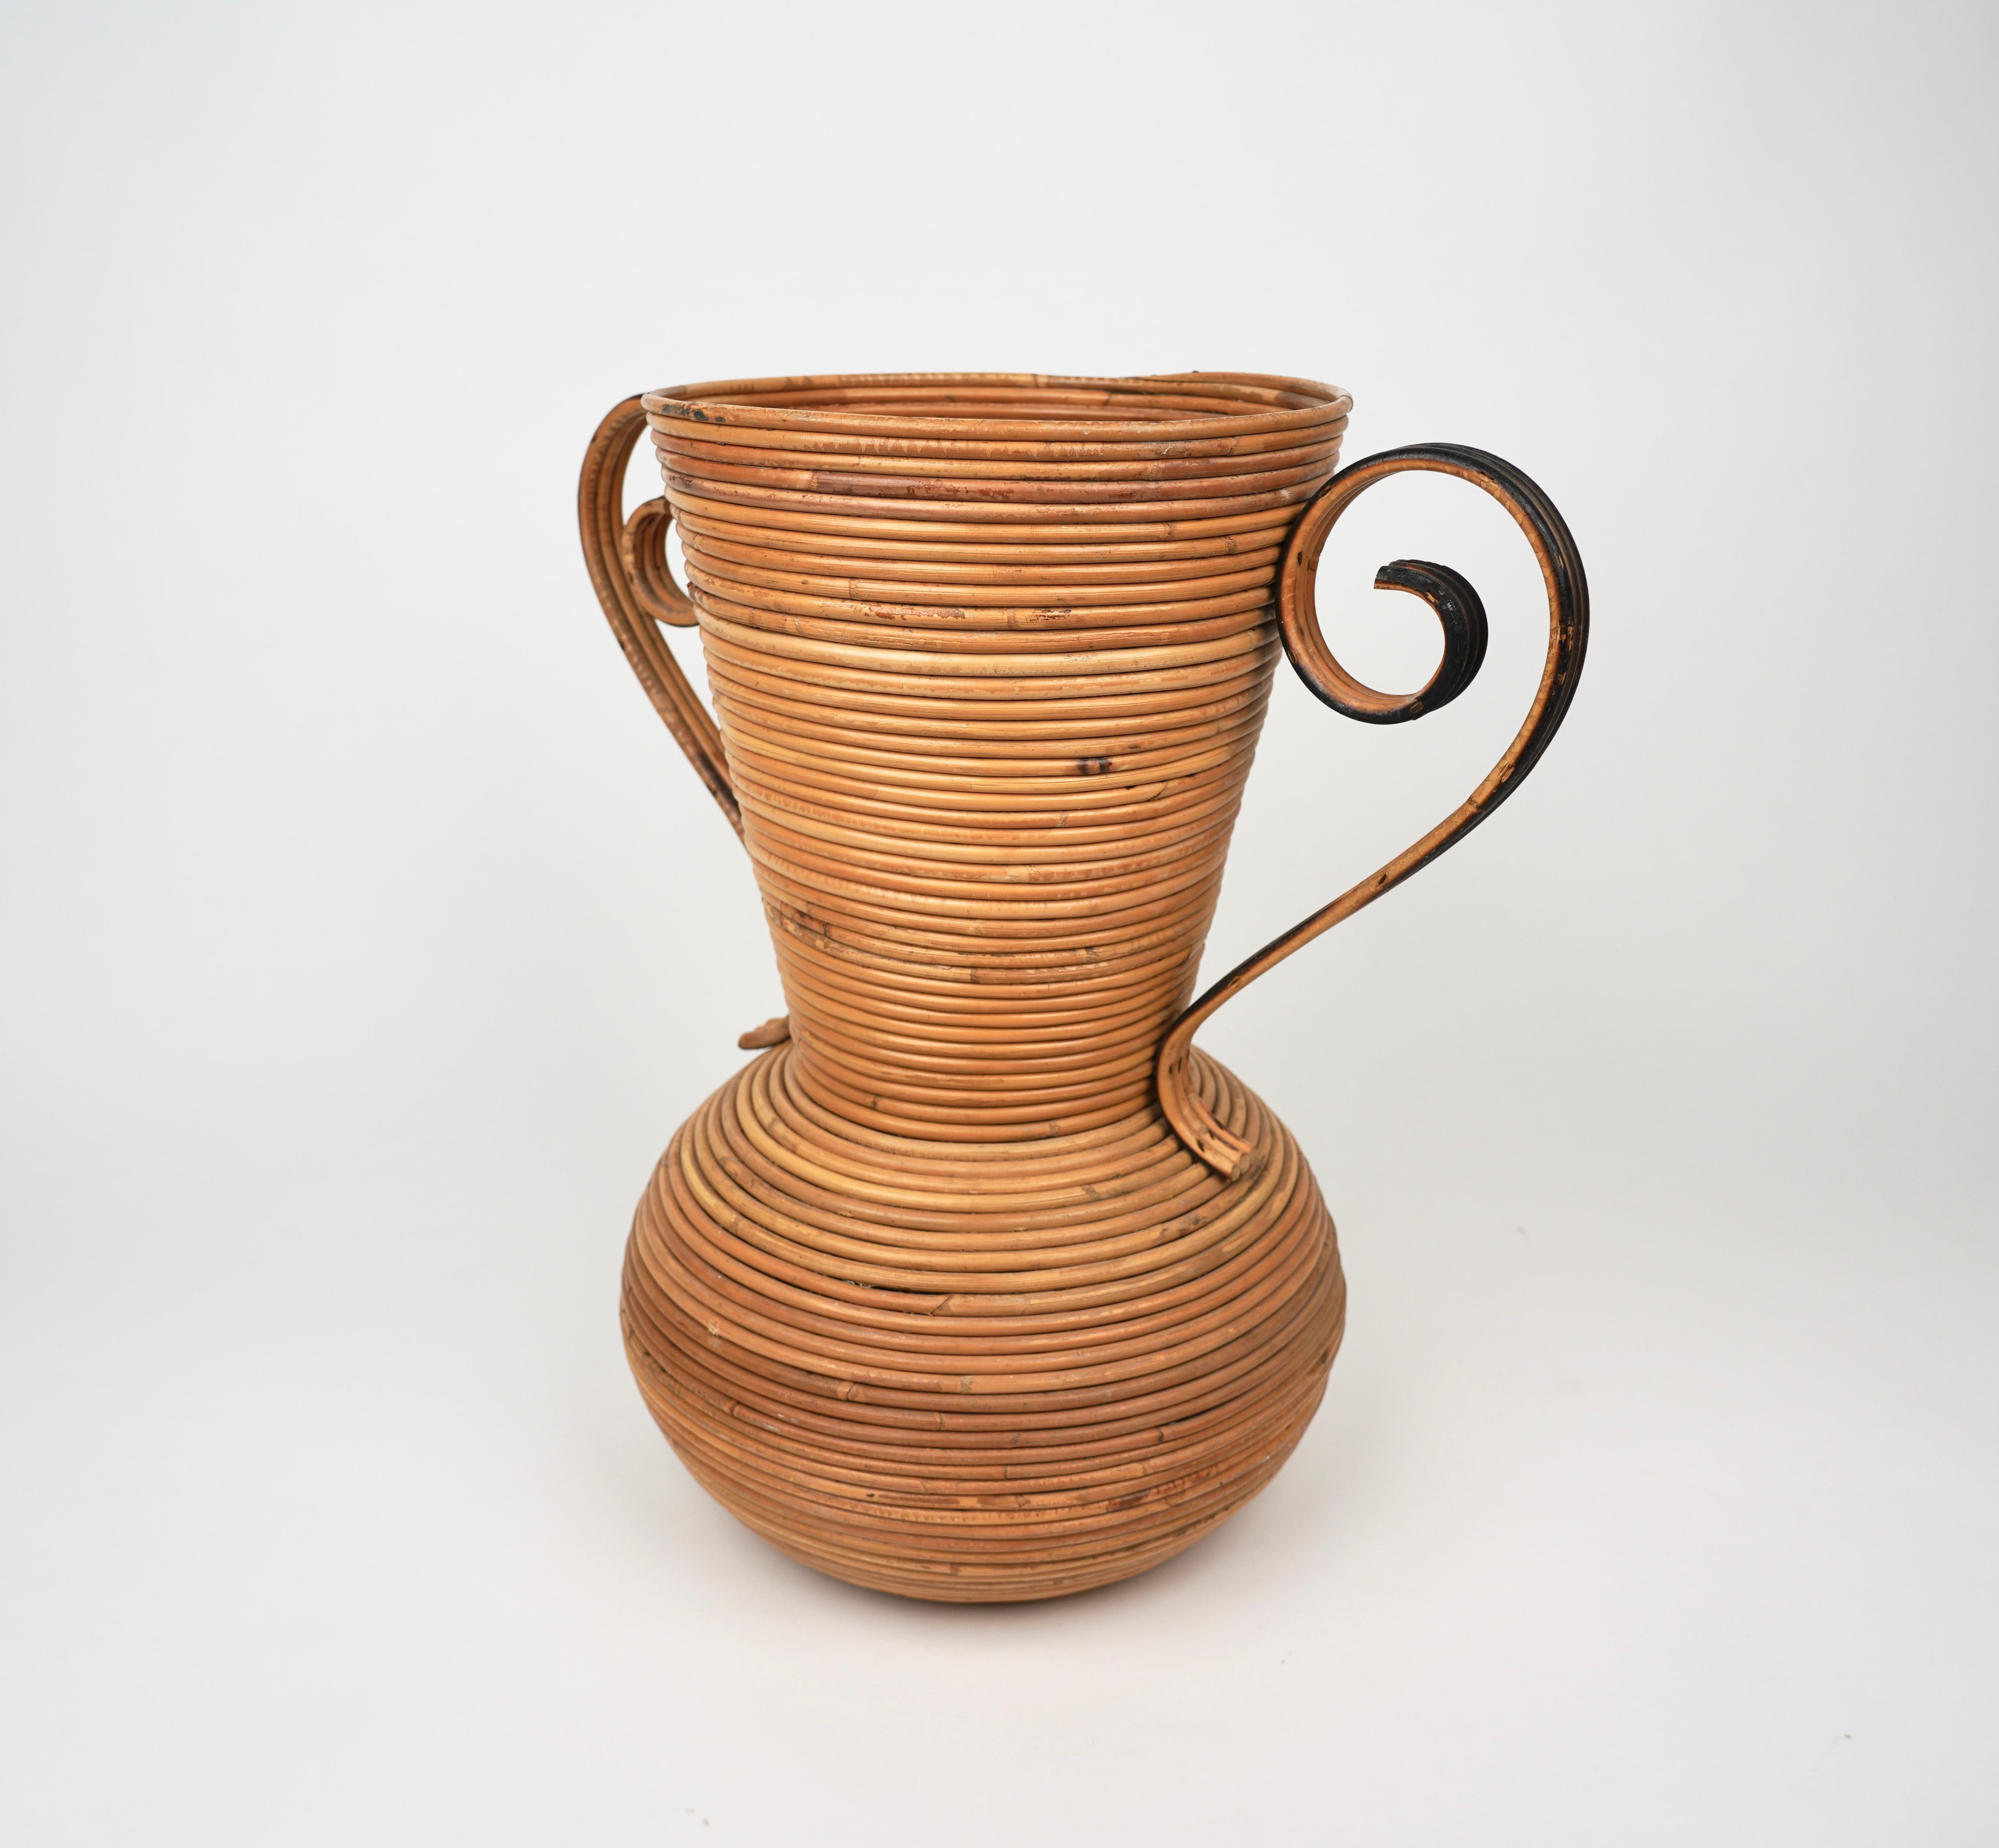 Bamboo Rattan Amphora Vase by Vivai del Sud, Italy, 1960s For Sale